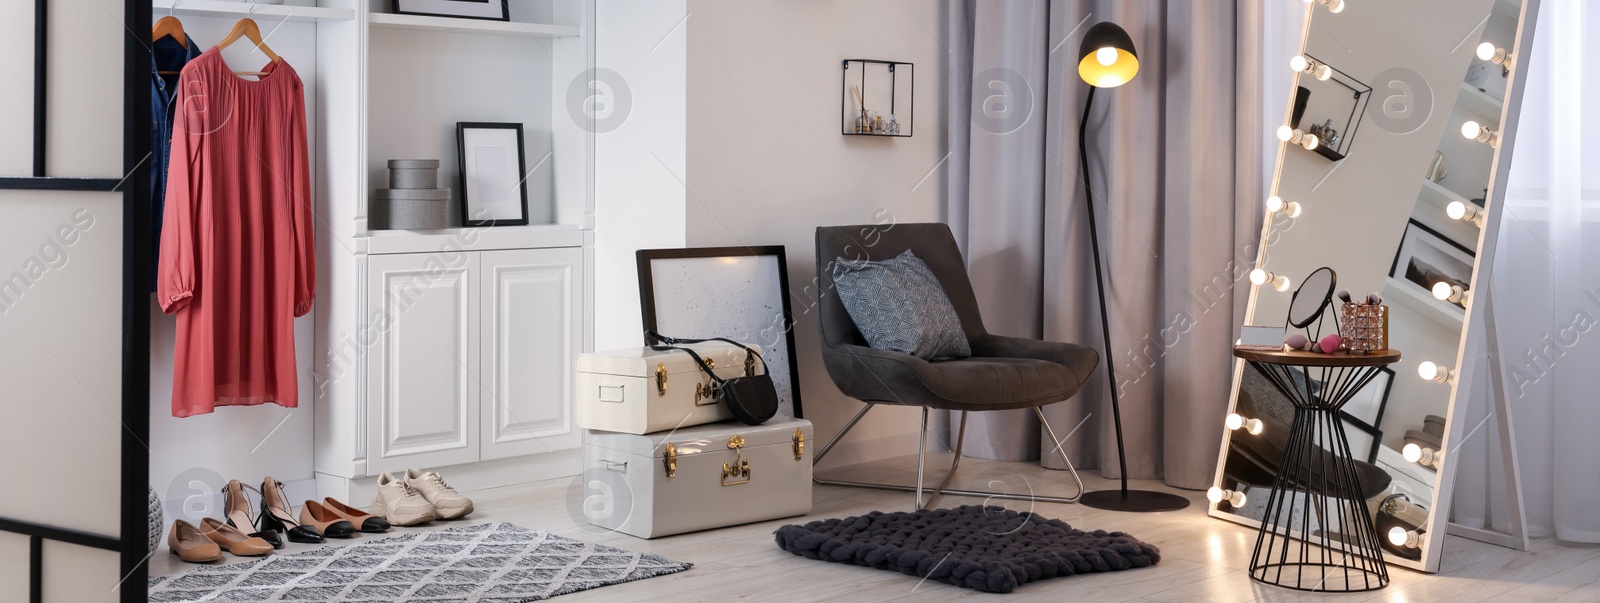 Image of Makeup room. Stylish mirror with light bulbs, beauty products on side table and armchair indoors, banner design